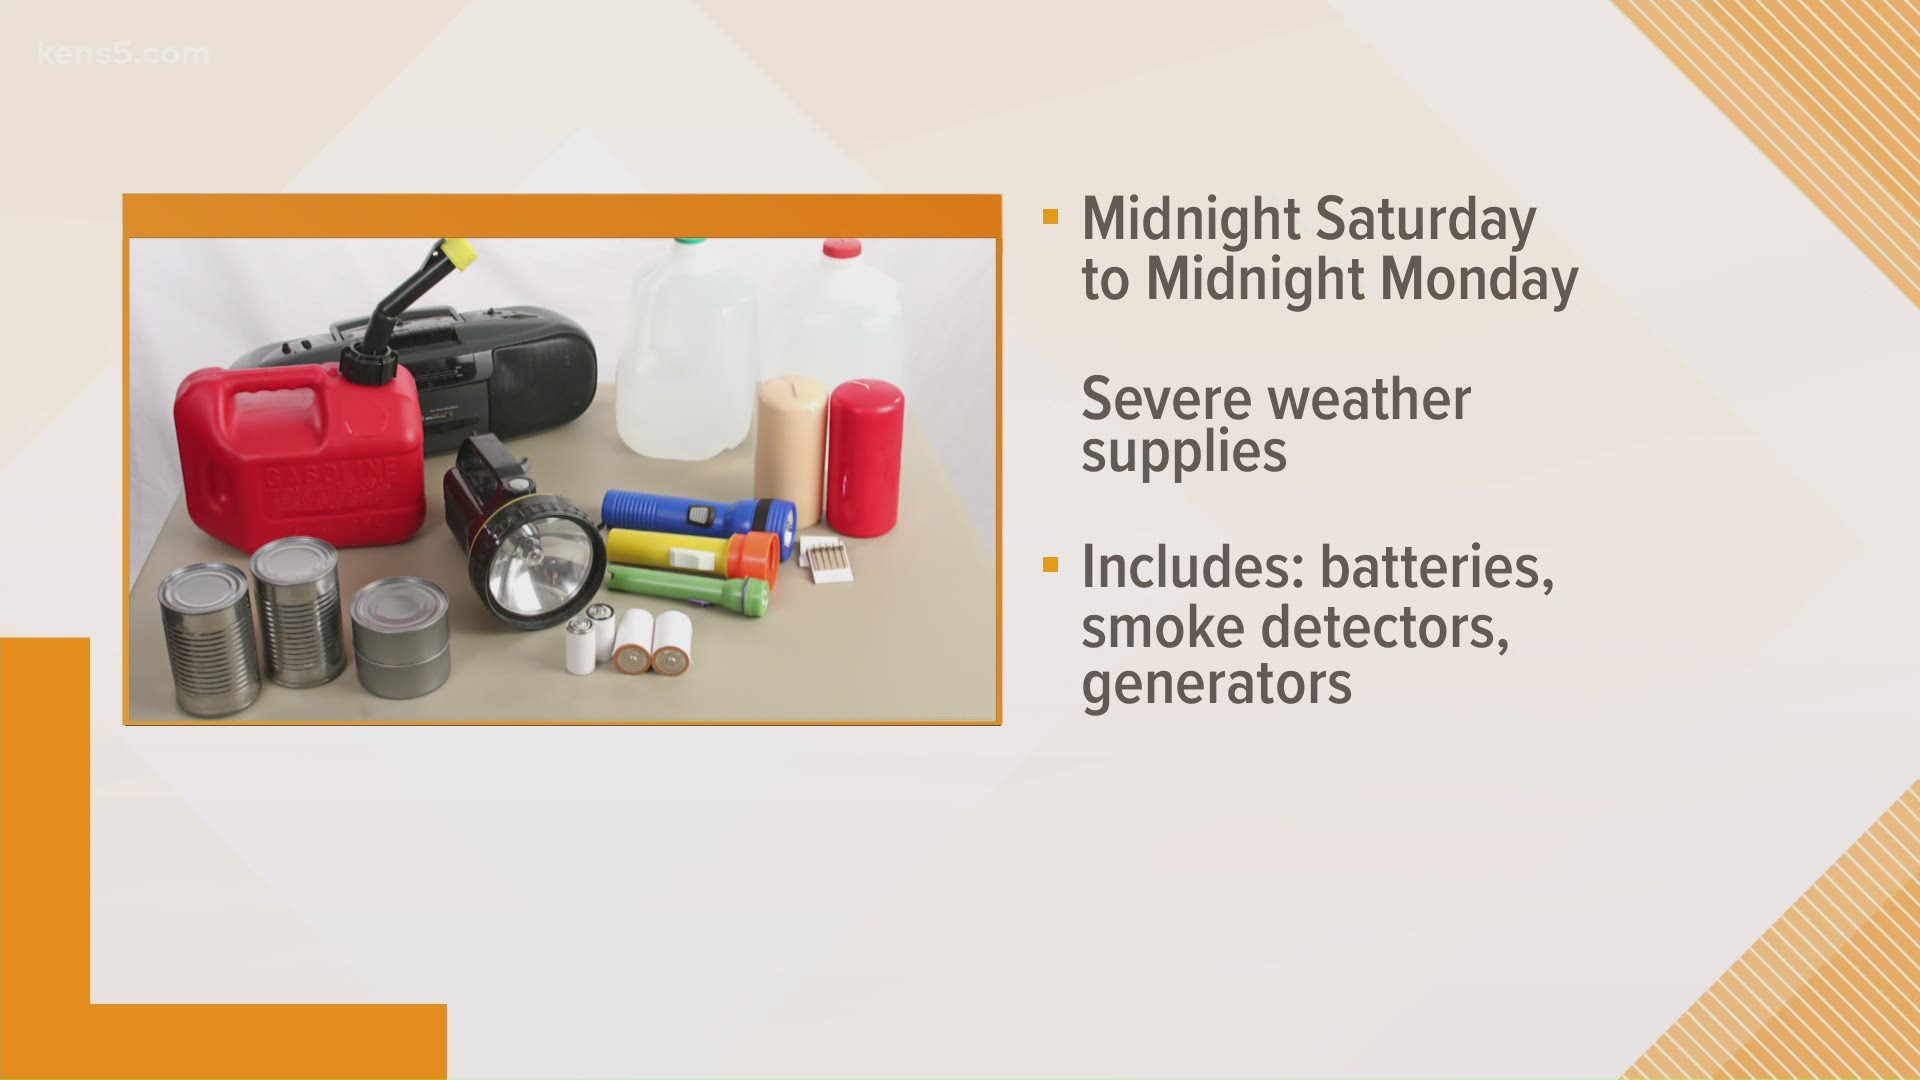 It includes things like household batteries, smoke detectors and some generators.